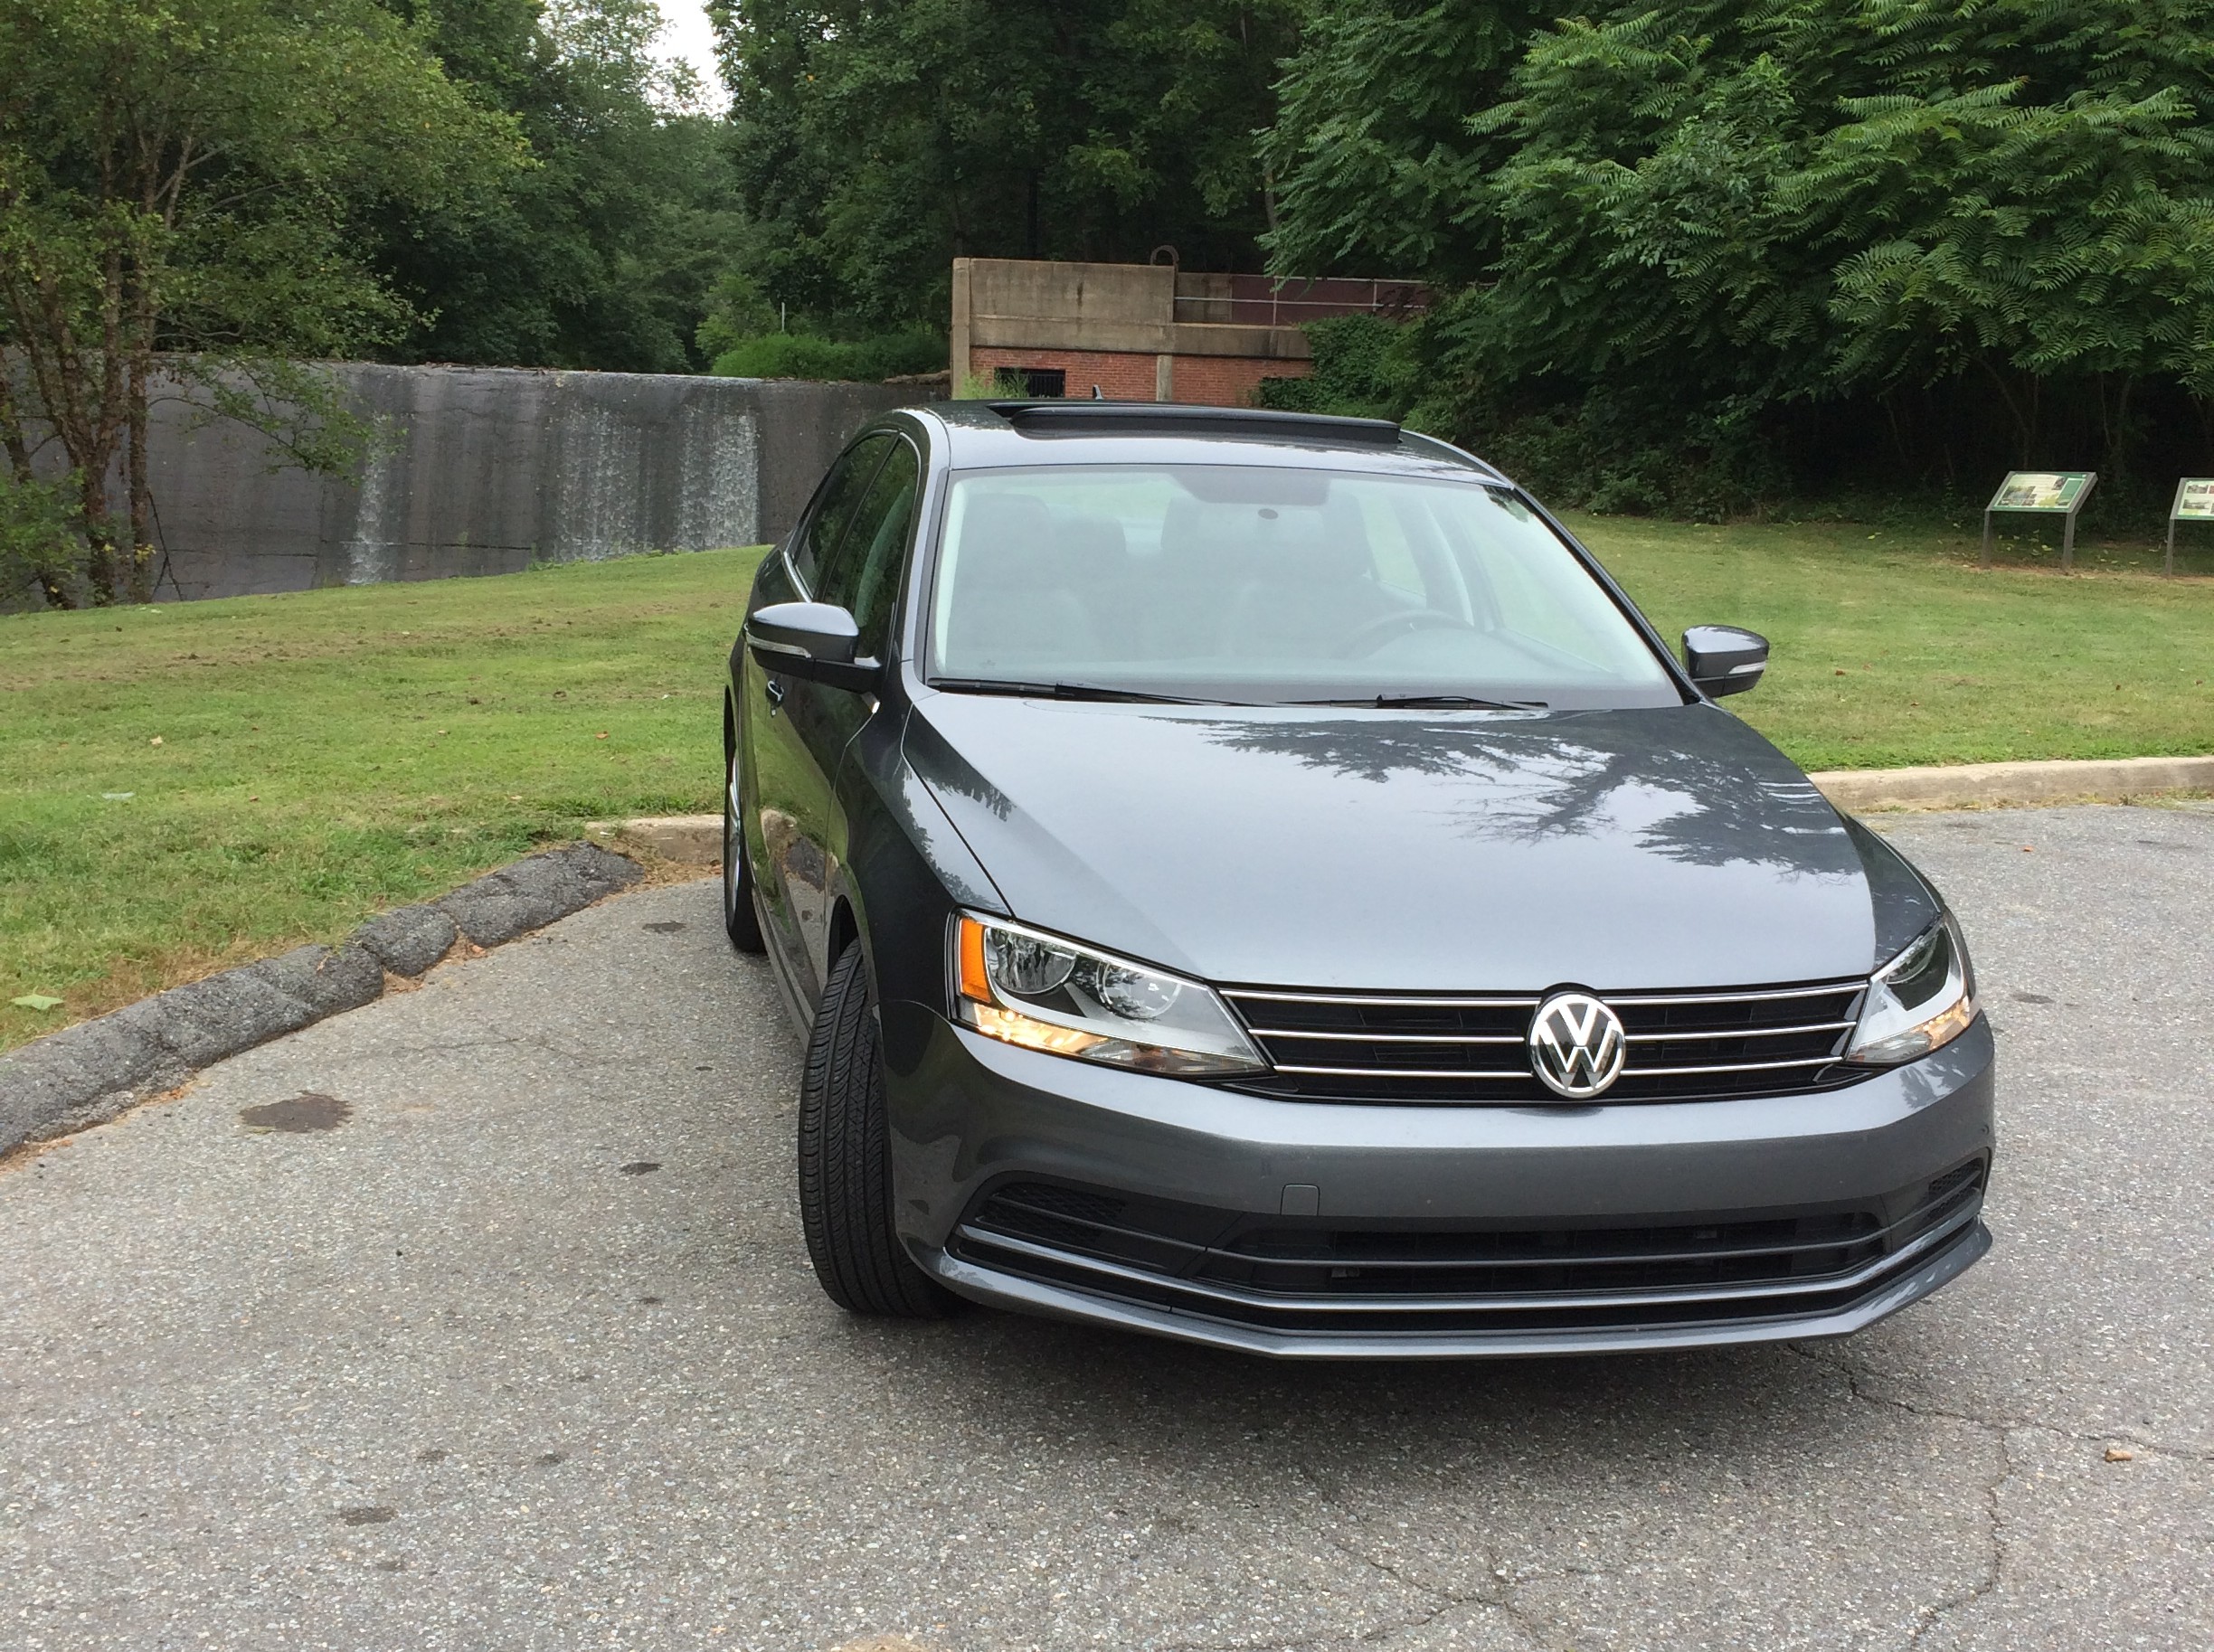 Car Report: Volkswagen Jetta updated for 2015, improved underneath the skin